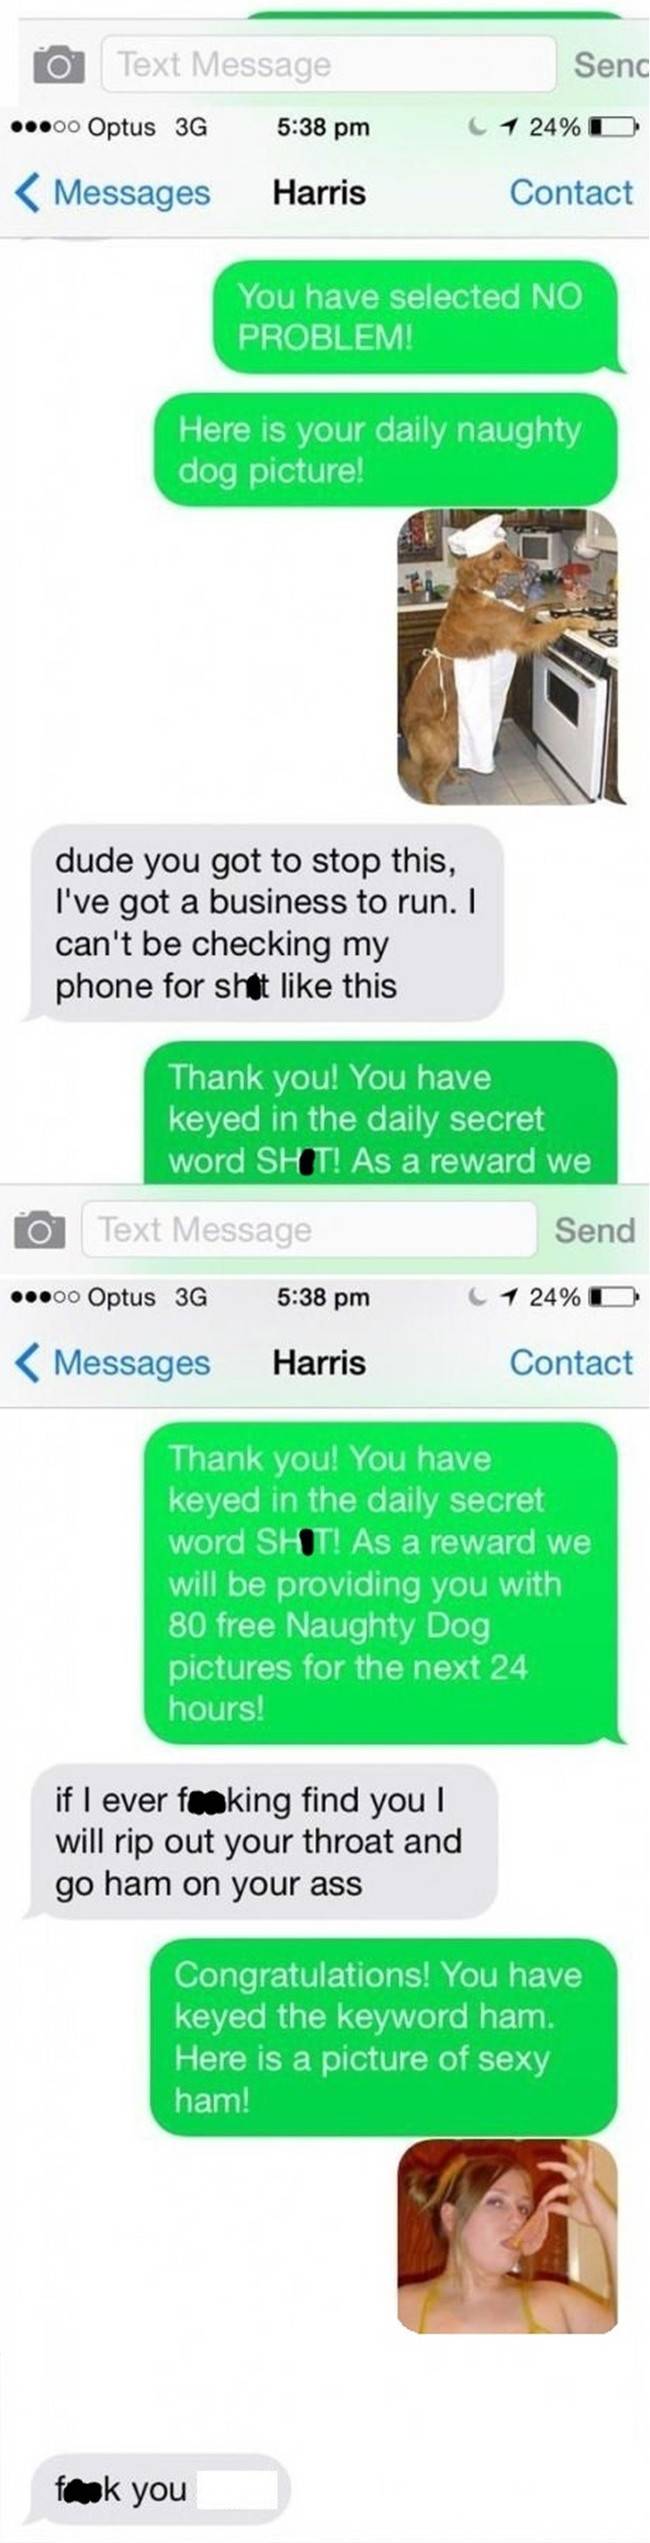 best scam text responses - Senc o Text Message ...00 Optus 3G 1 24%D Messages Harris Contact You have selected No Problem! Here is your daily naughty dog picture! dude you got to stop this, I've got a business to run. I can't be checking my phone for shat